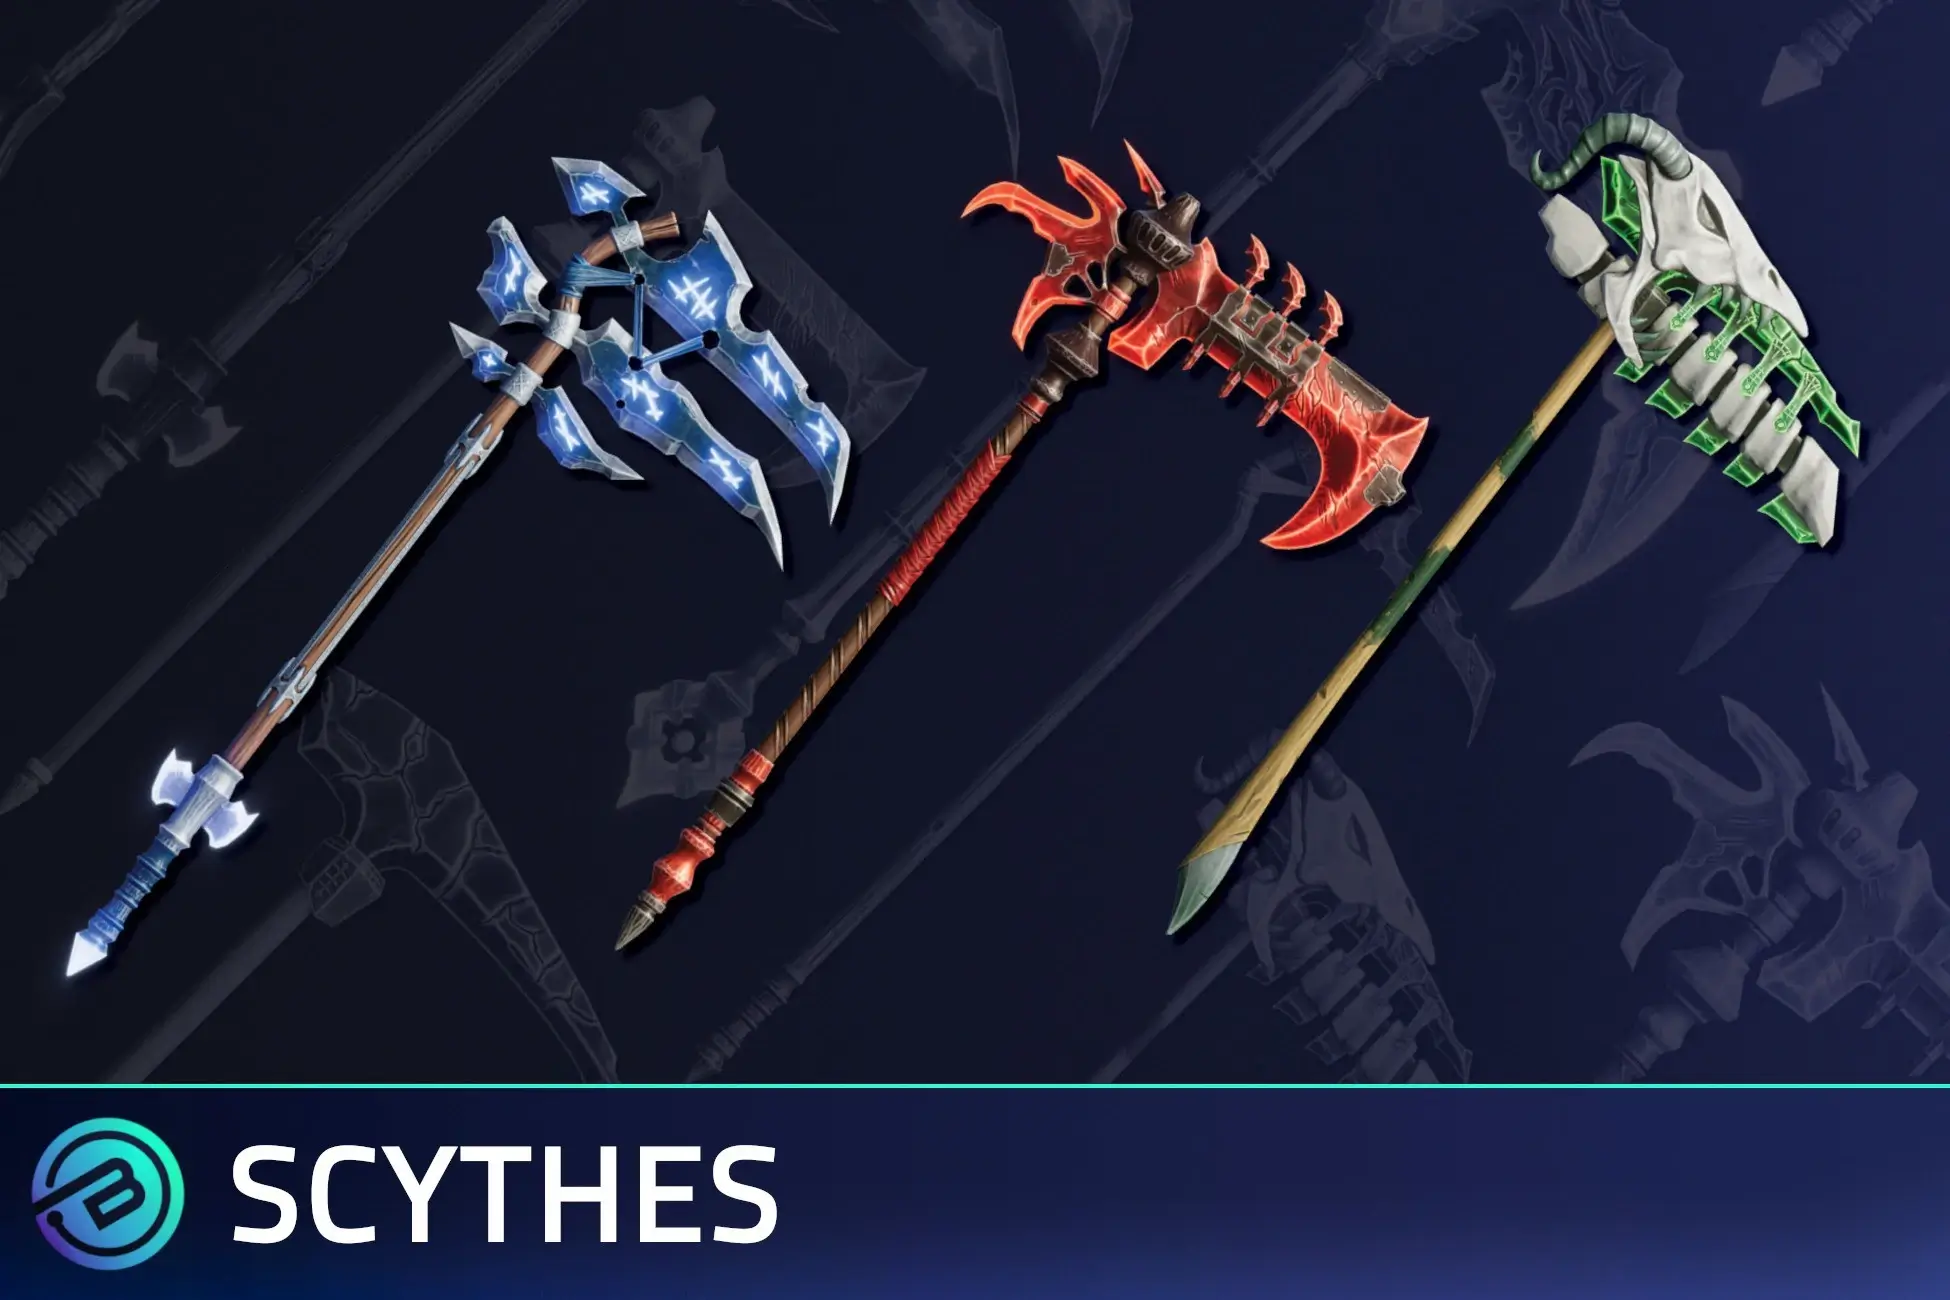 Stylized Scythes free download for the unity game engine